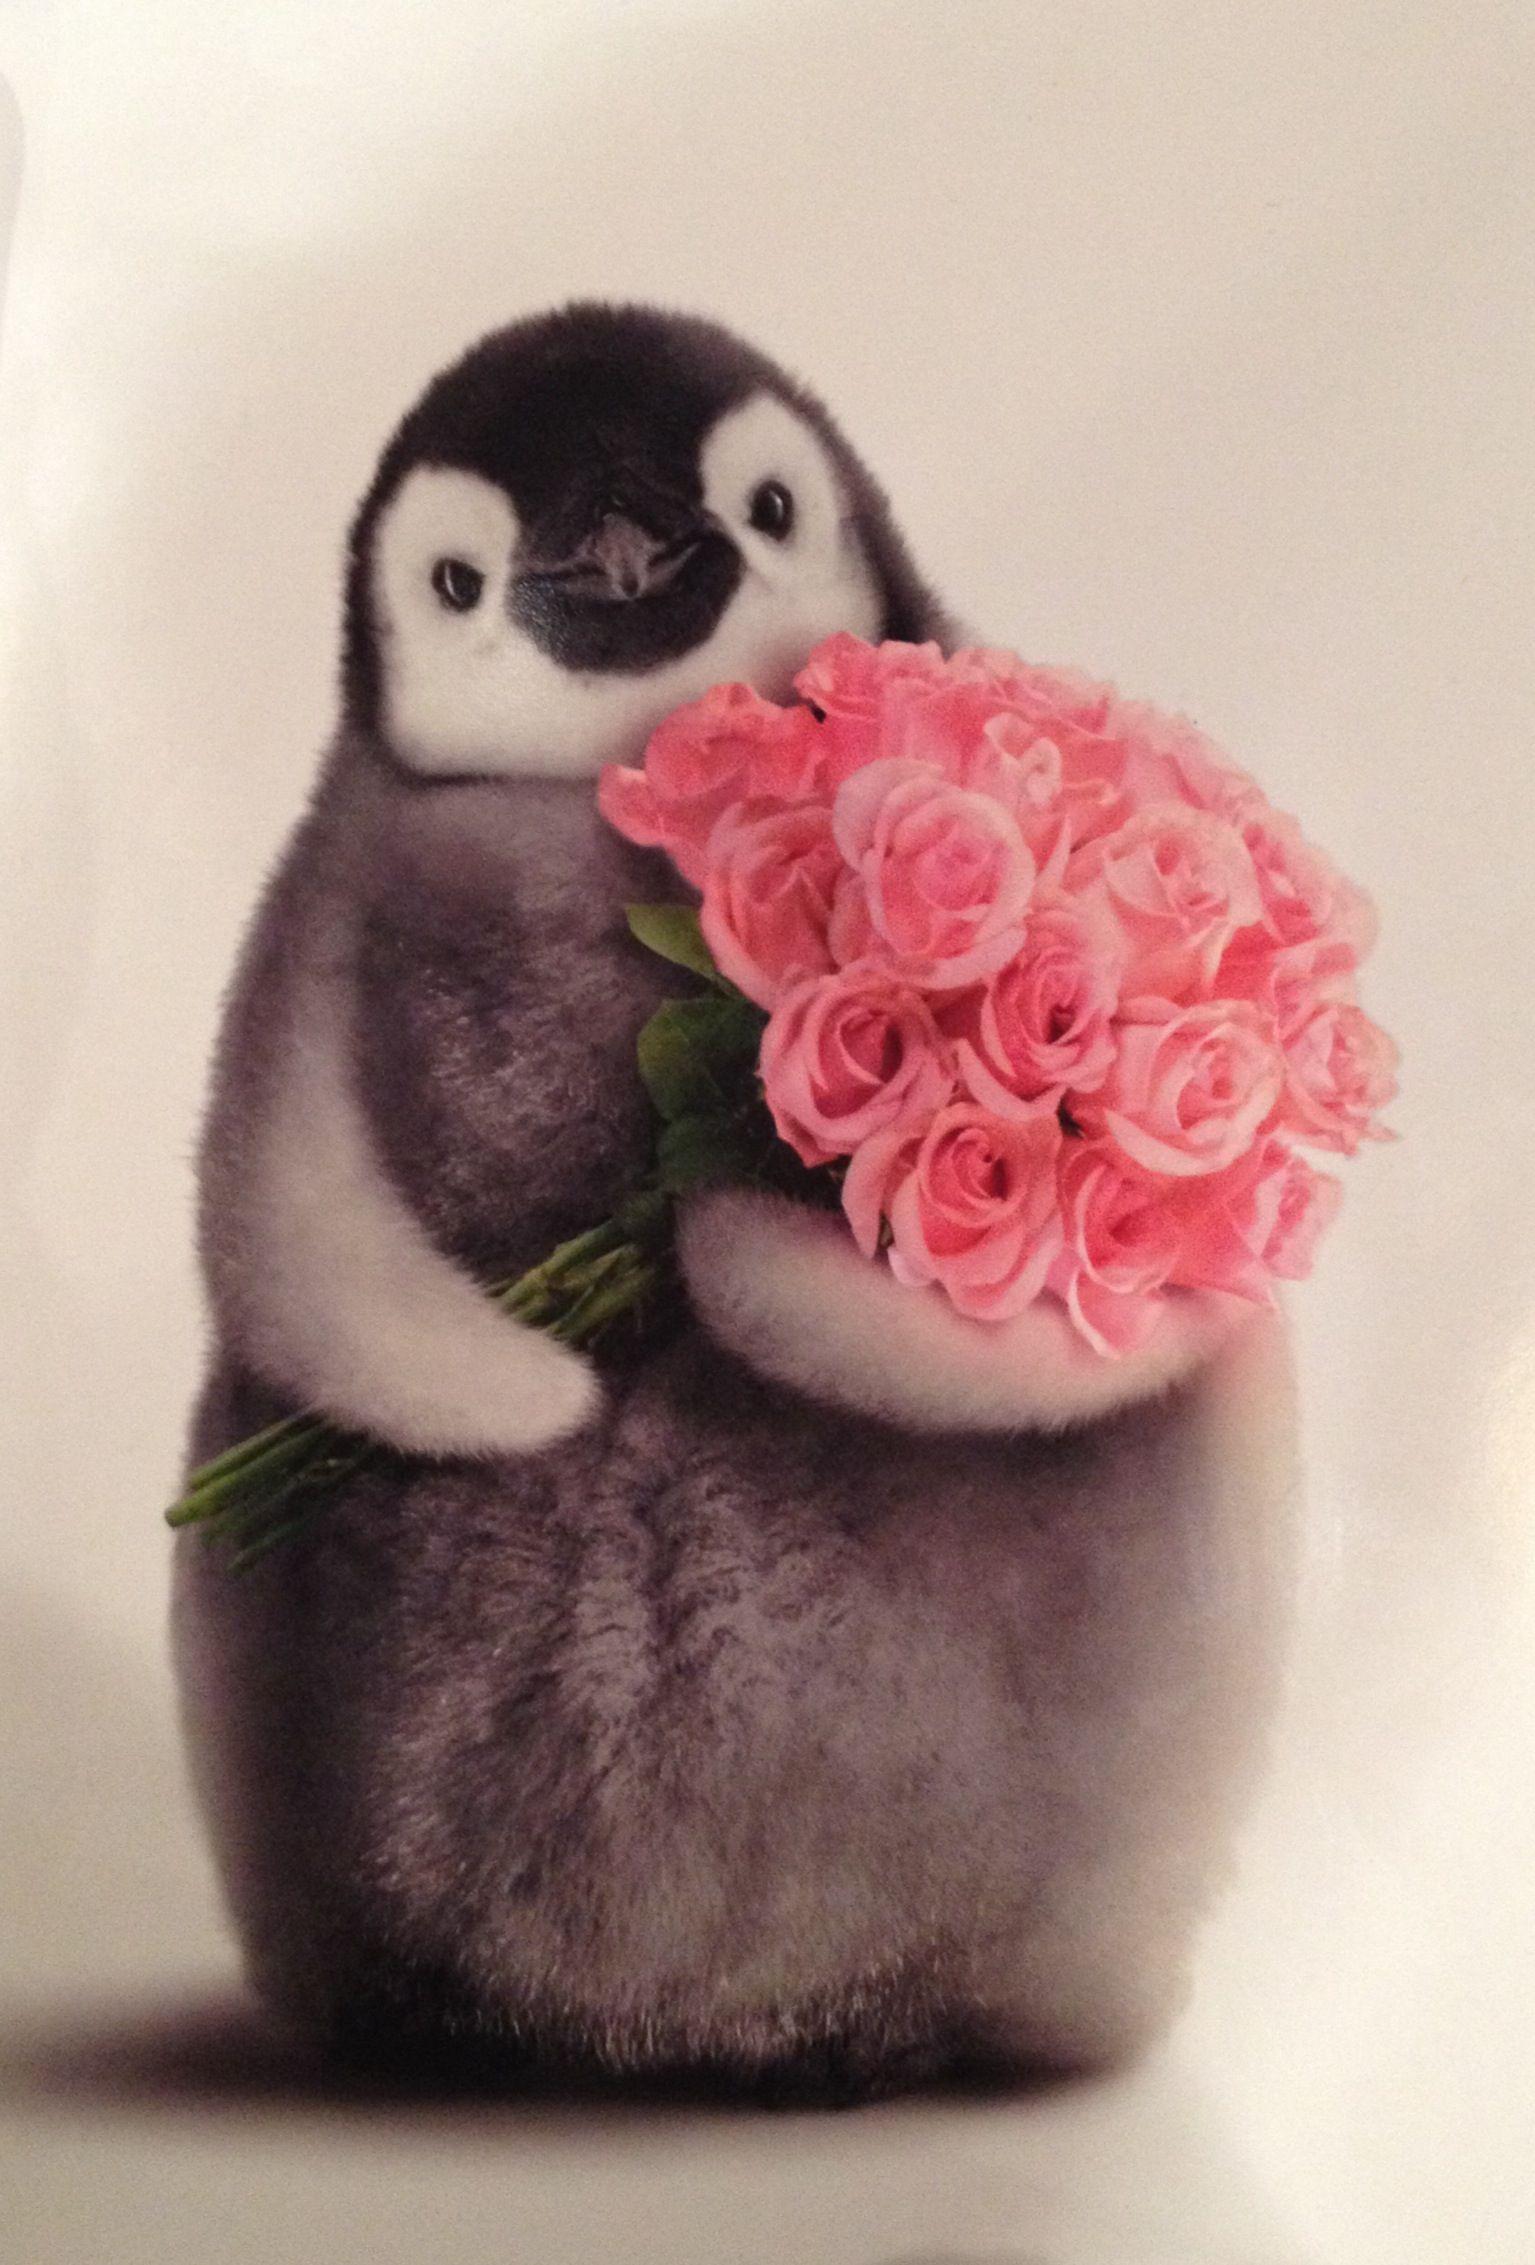 Free download Details about Penguin With Flower Bouquet Funny